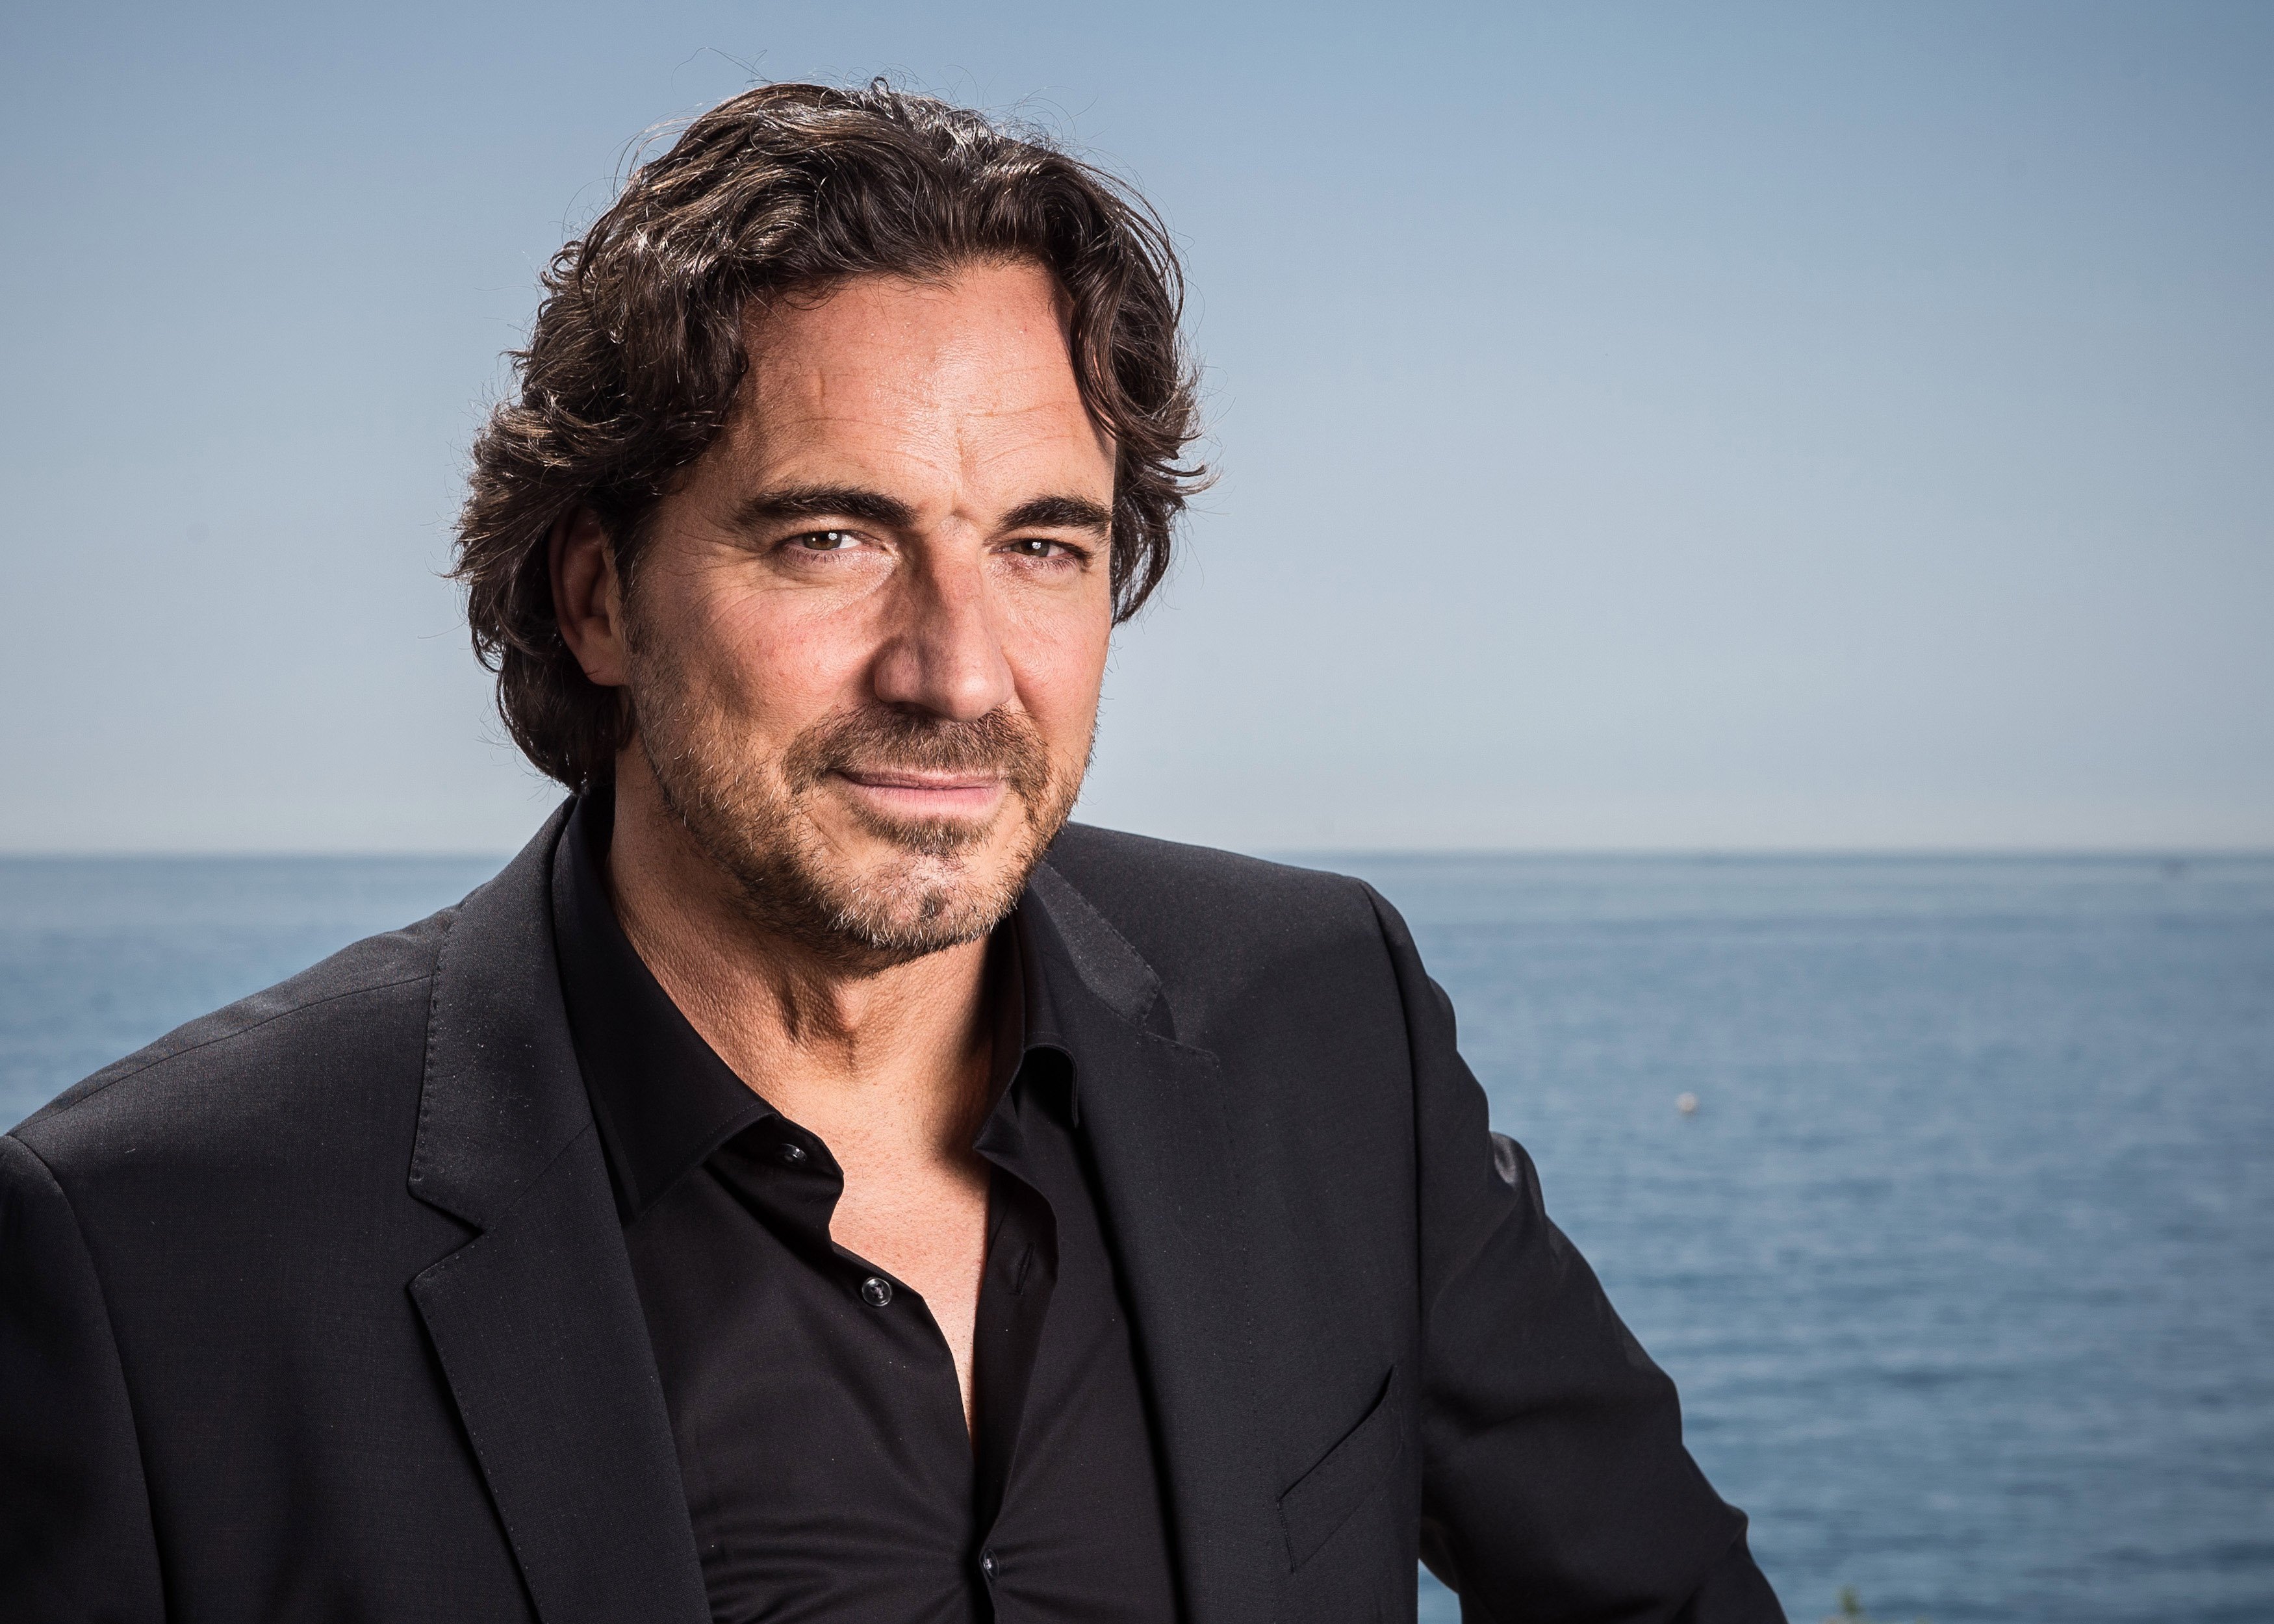 'The Bold and the Beautiful' star Thorsten Kaye in black suit and posing in front of the ocean.